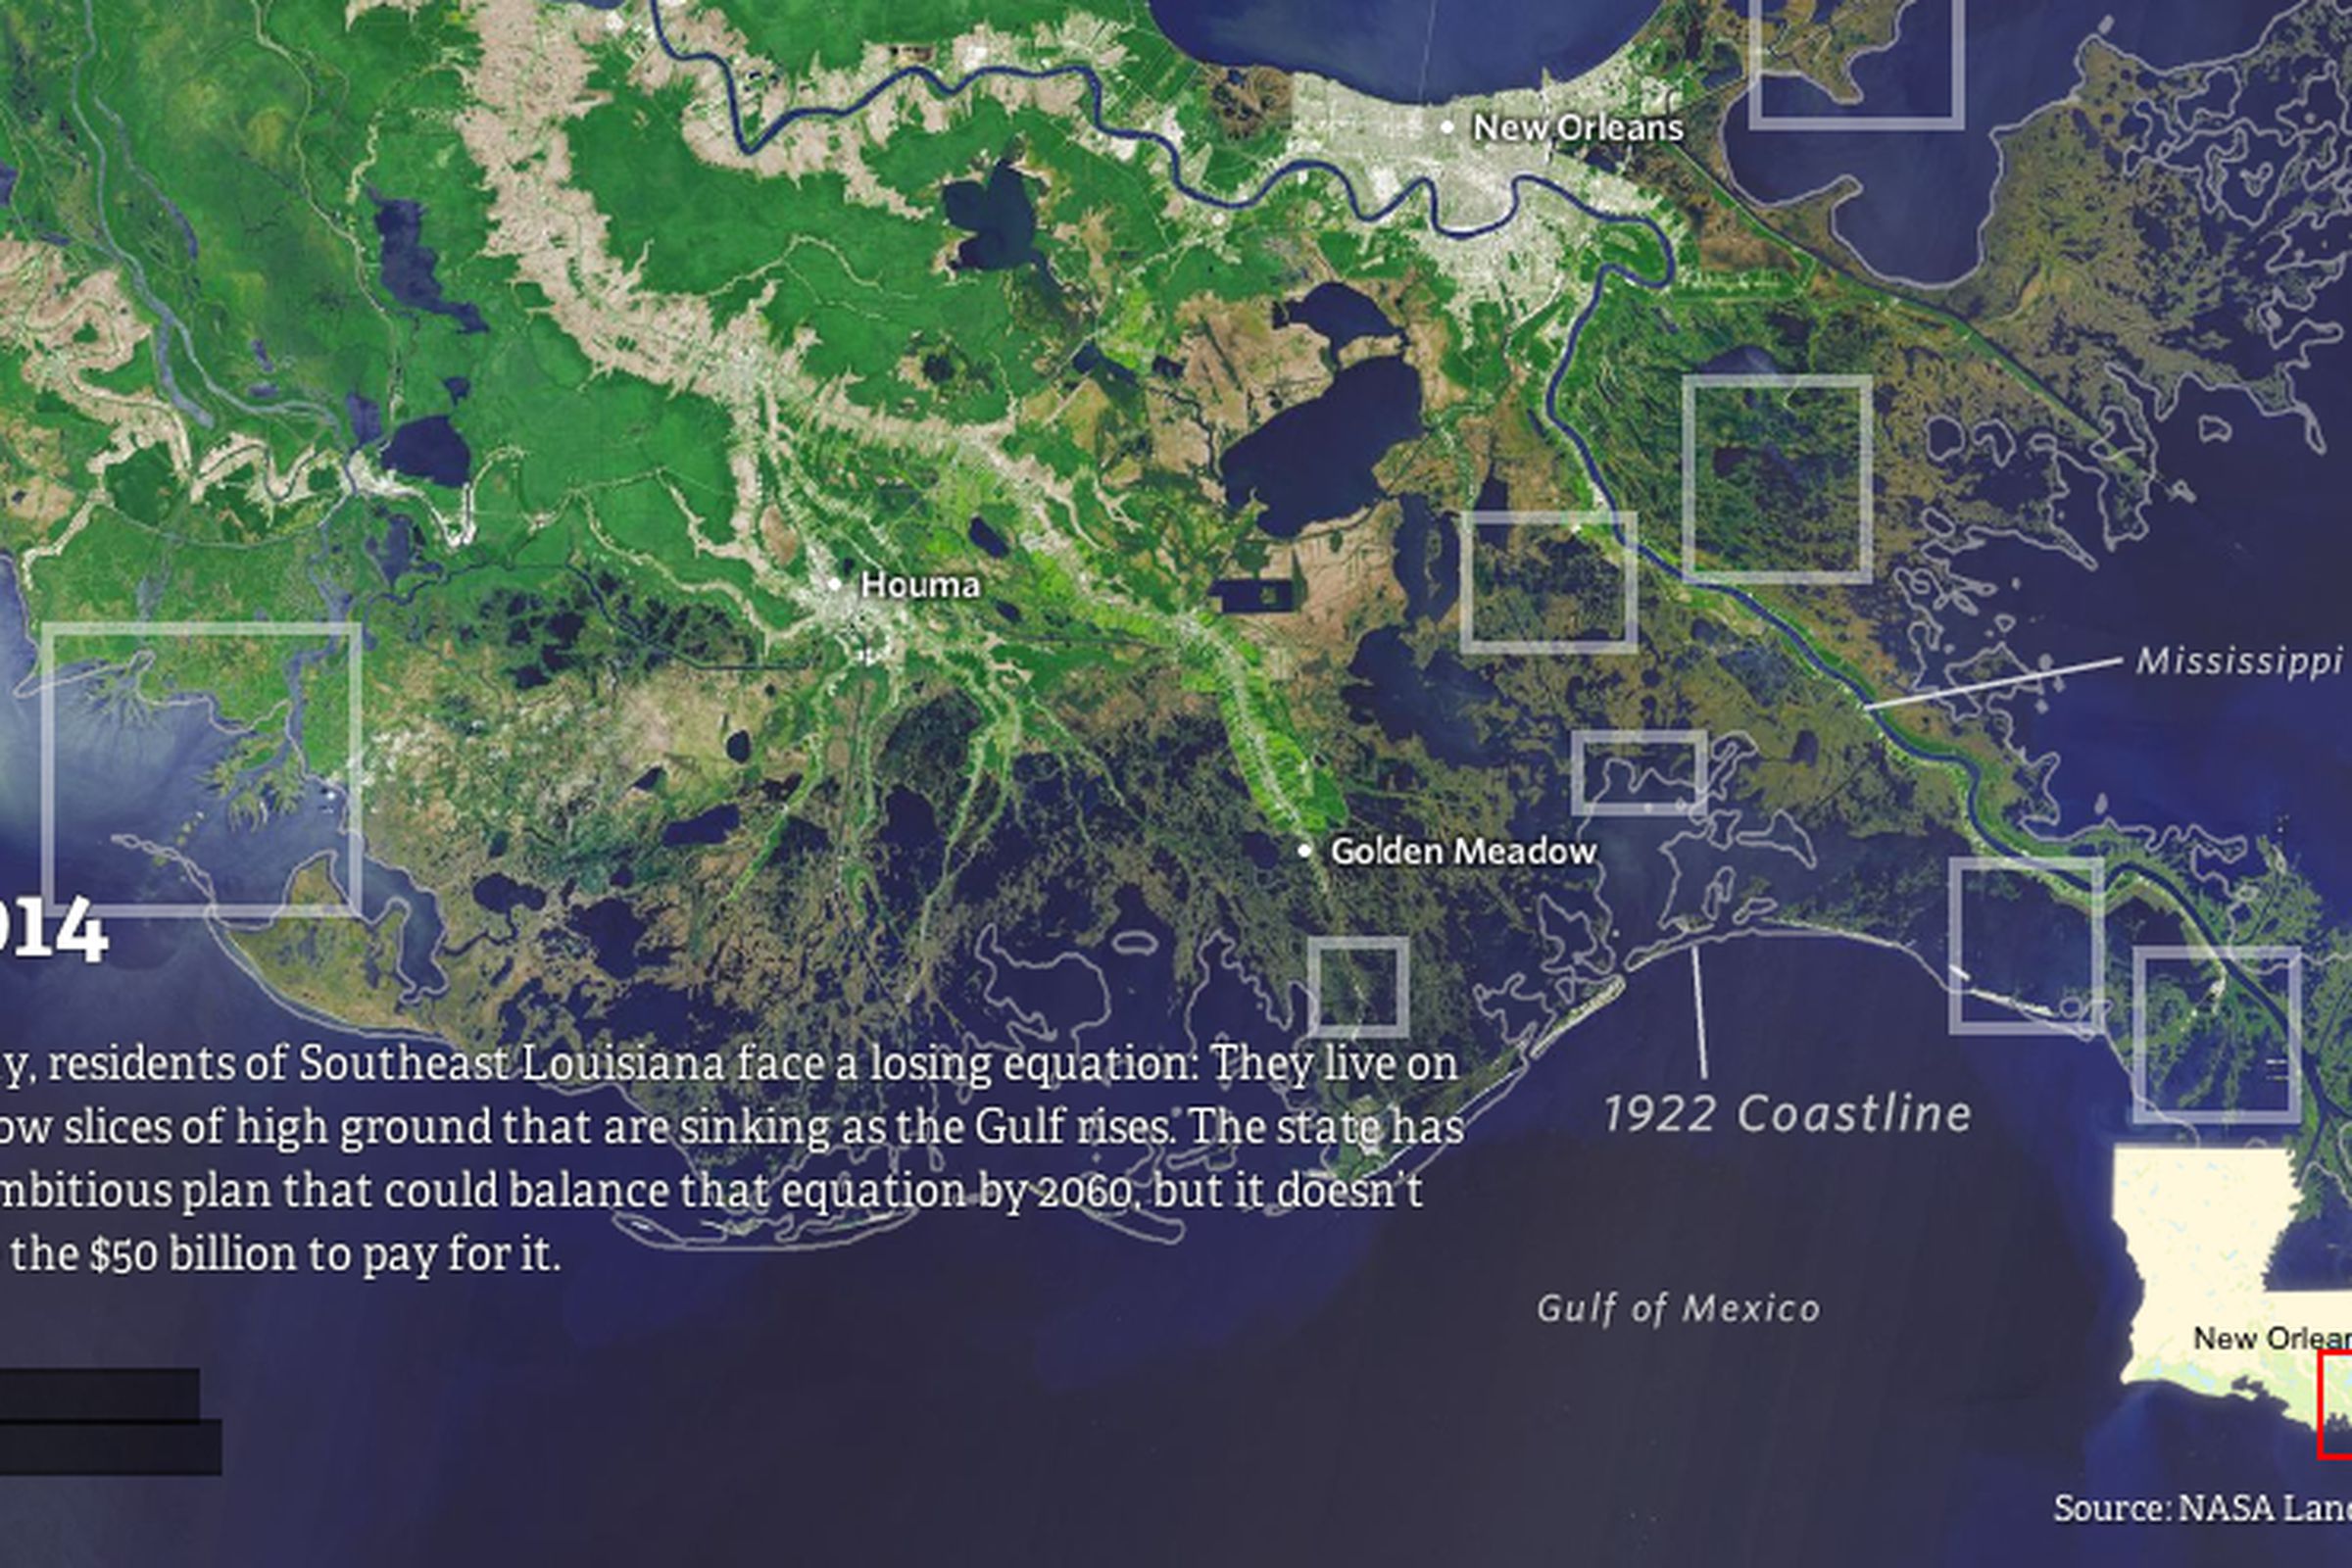 Screenshot of ProPublica's comprehensive map investigation into the effects of rising seas on coastal Louisiana